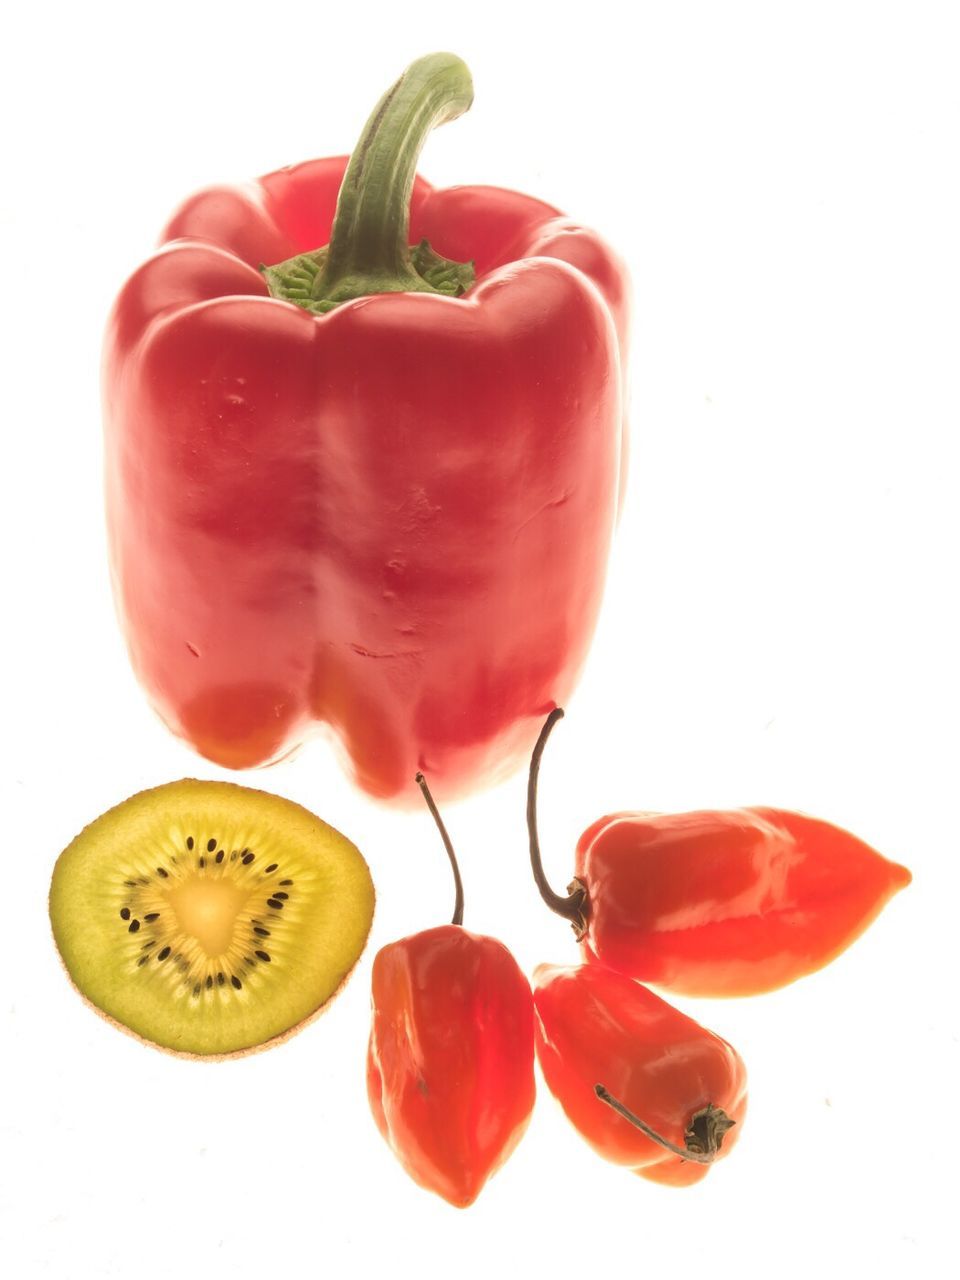 Close-up of red bell pepper over white background